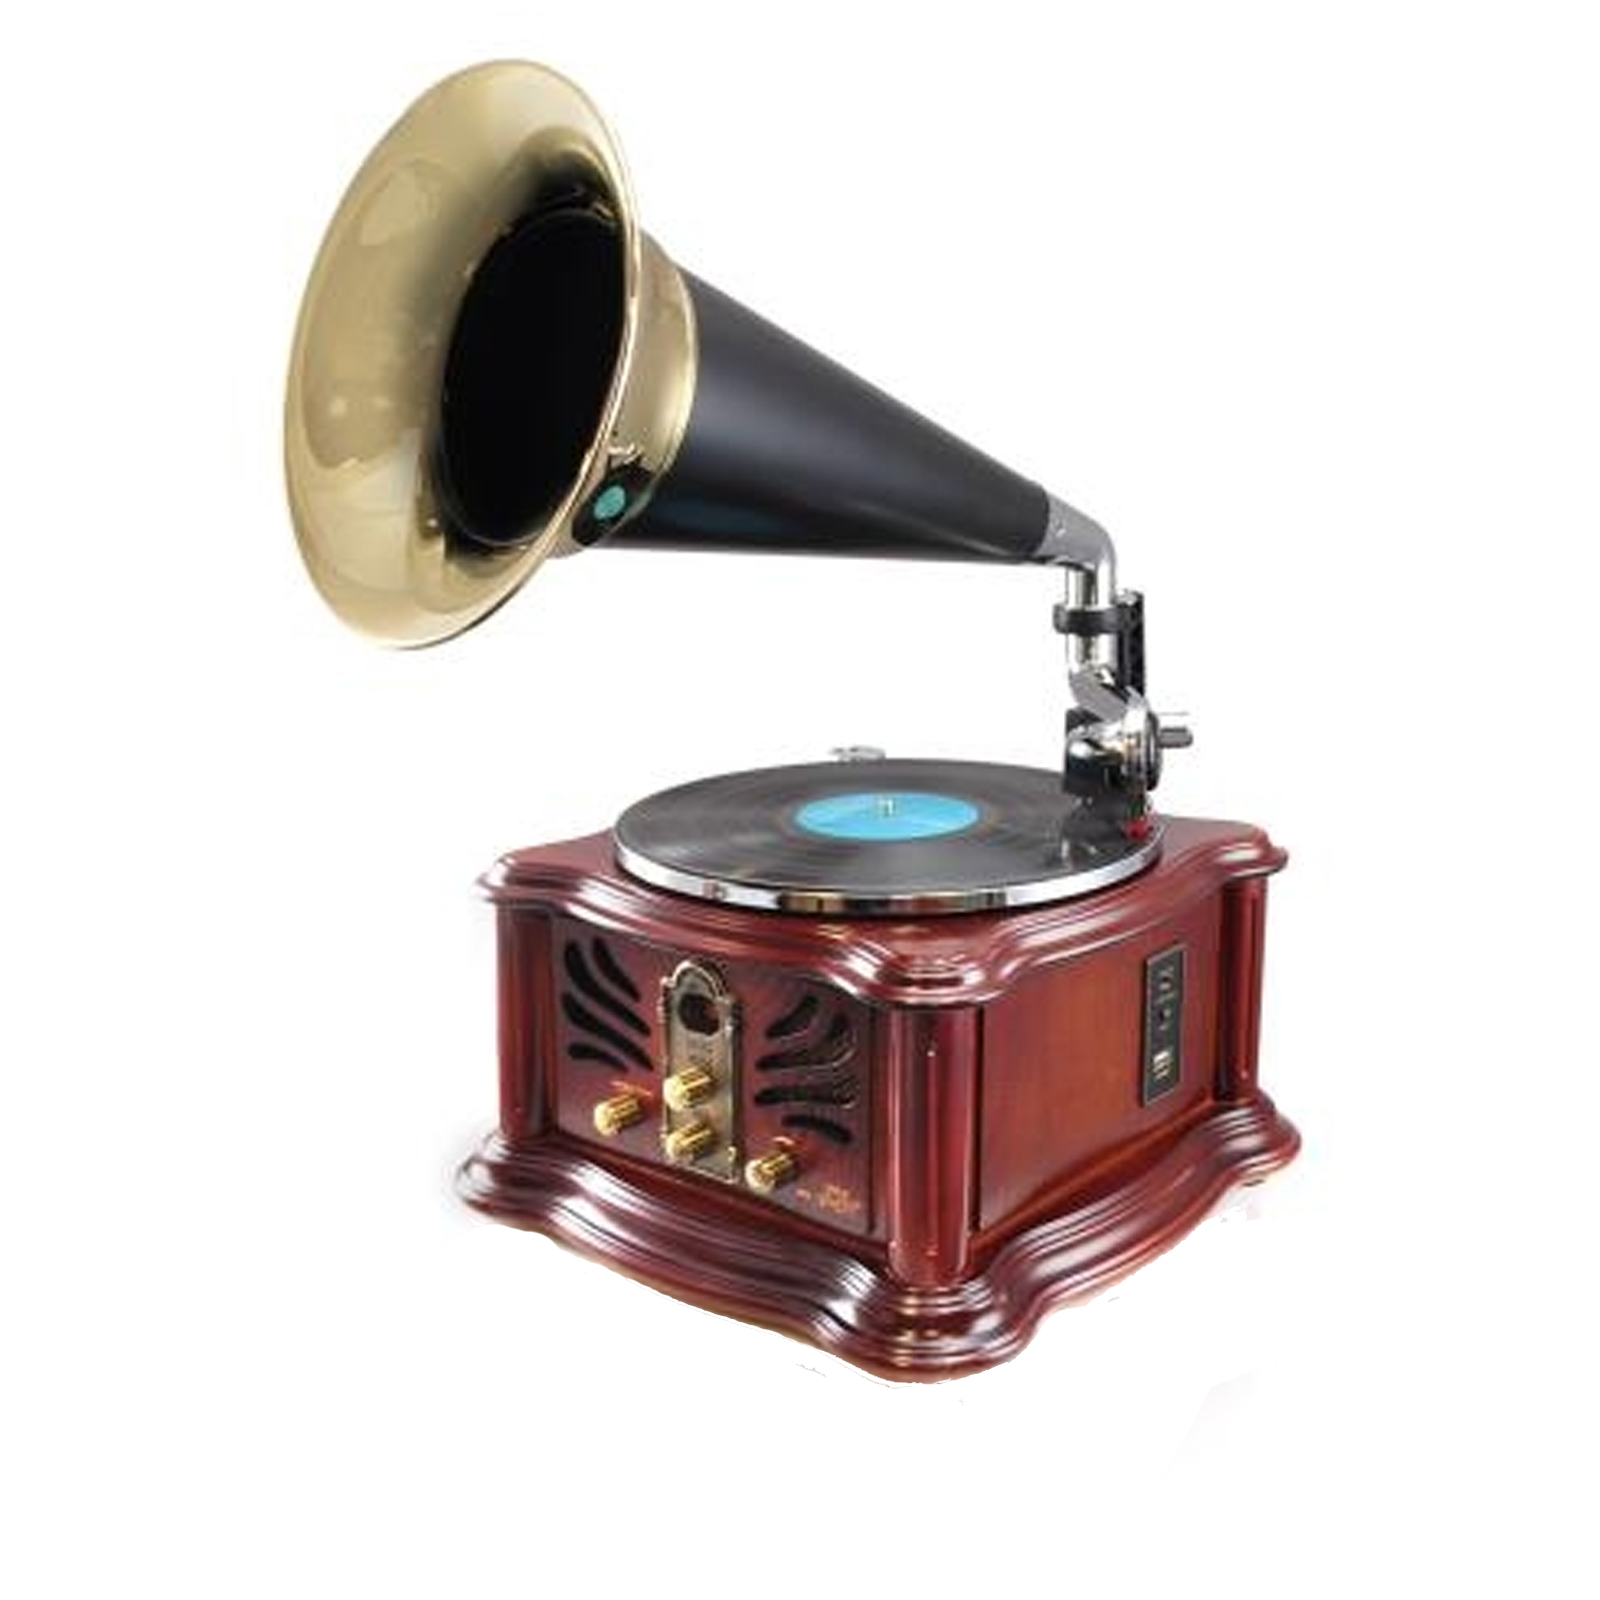 Vintage Retro Classic Style BT Turntable Phonograph Speaker System with MP3 ReCording Ability - image 1 of 3